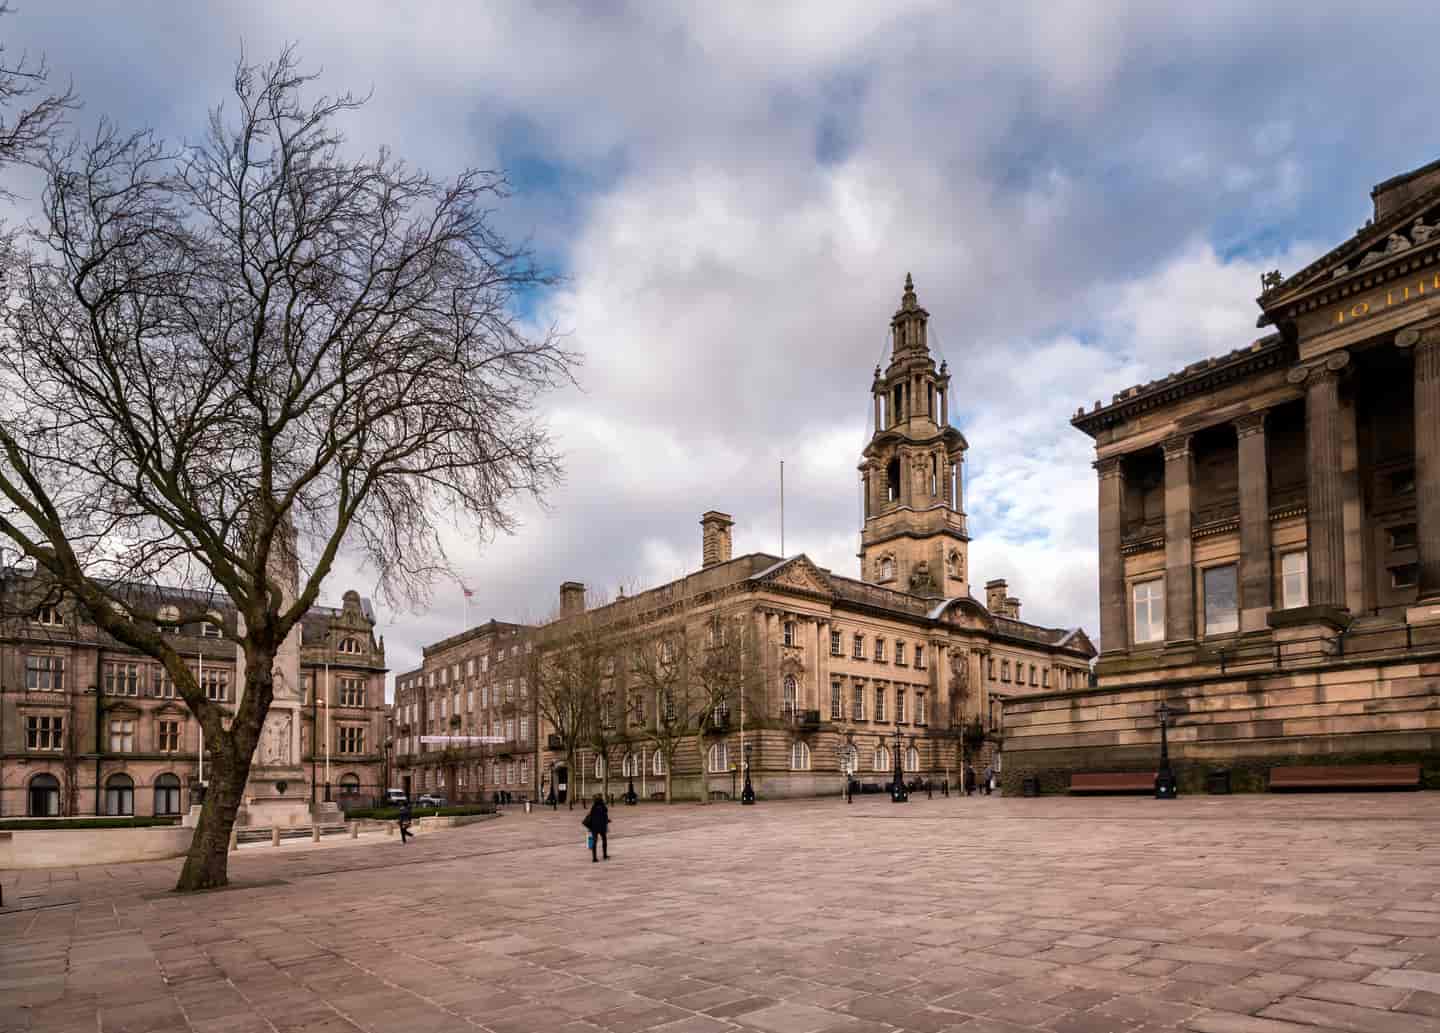 Student Accommodation in Preston - Sessions House courthouse